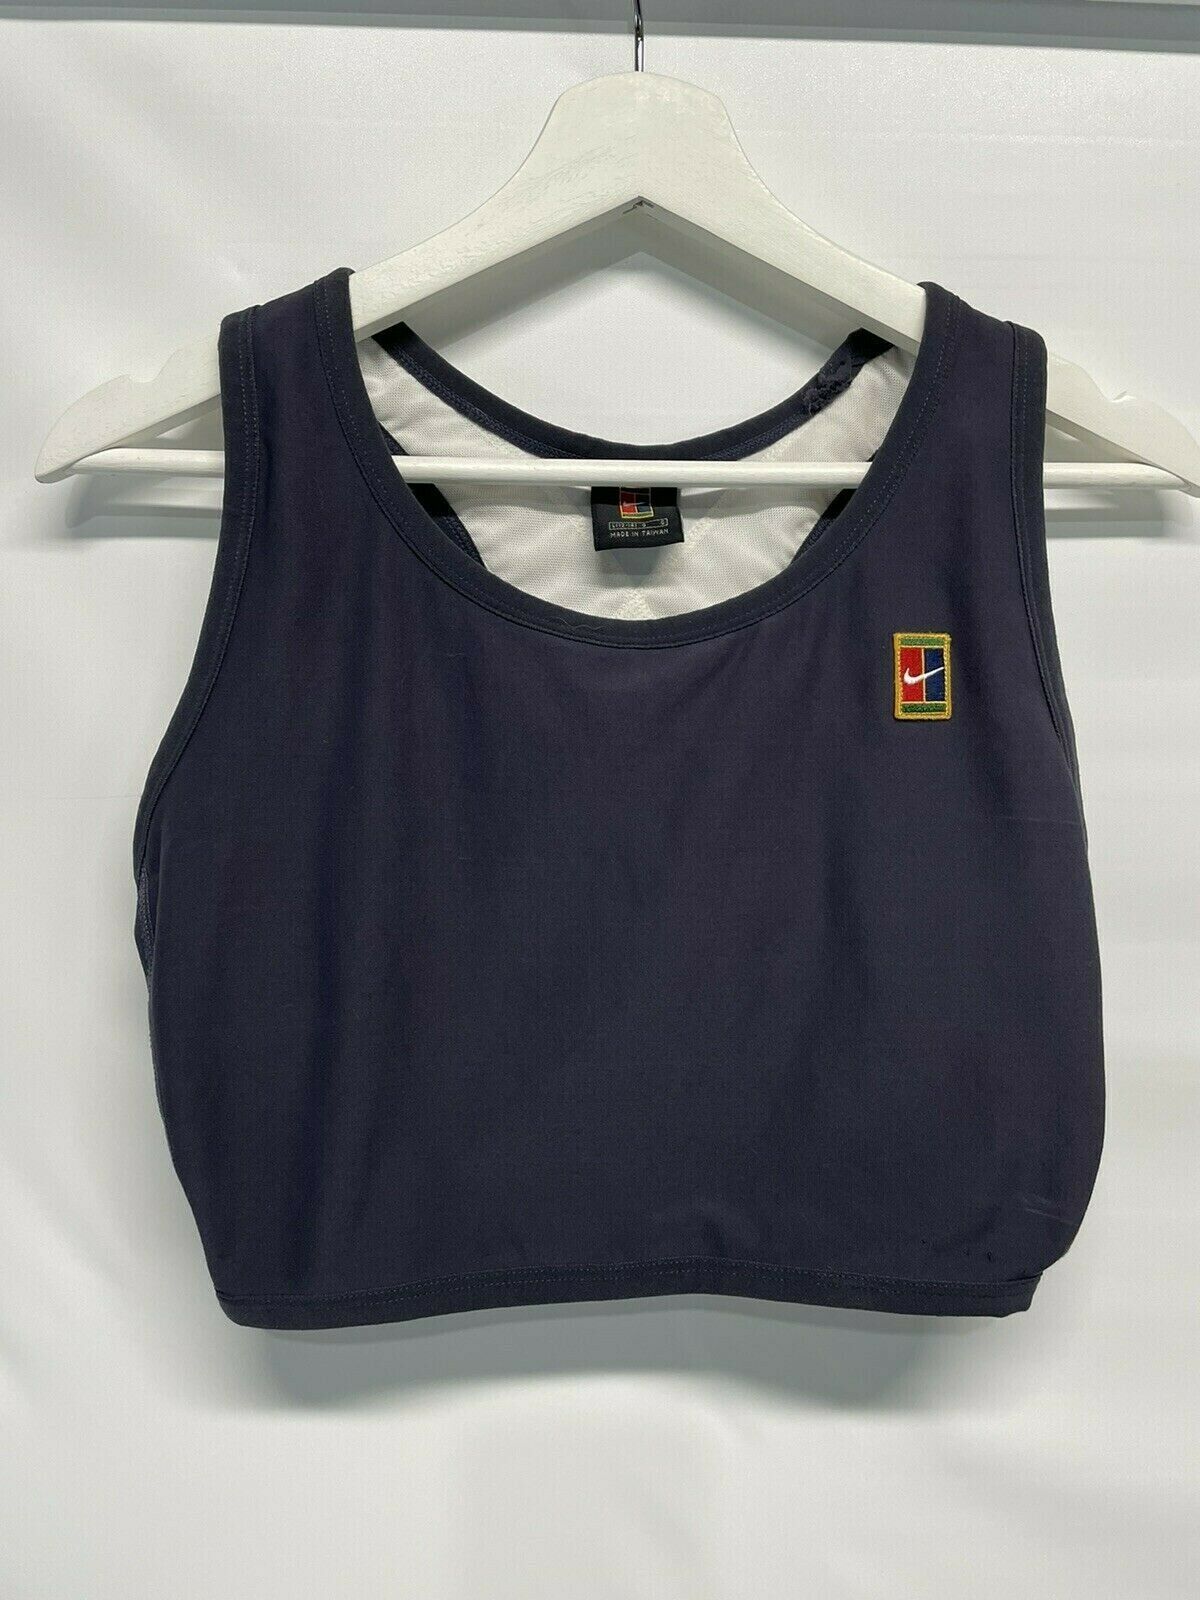 Nike Fit Dry Size Large (12-14) Blue's Racerback Tank Top Built In Bra